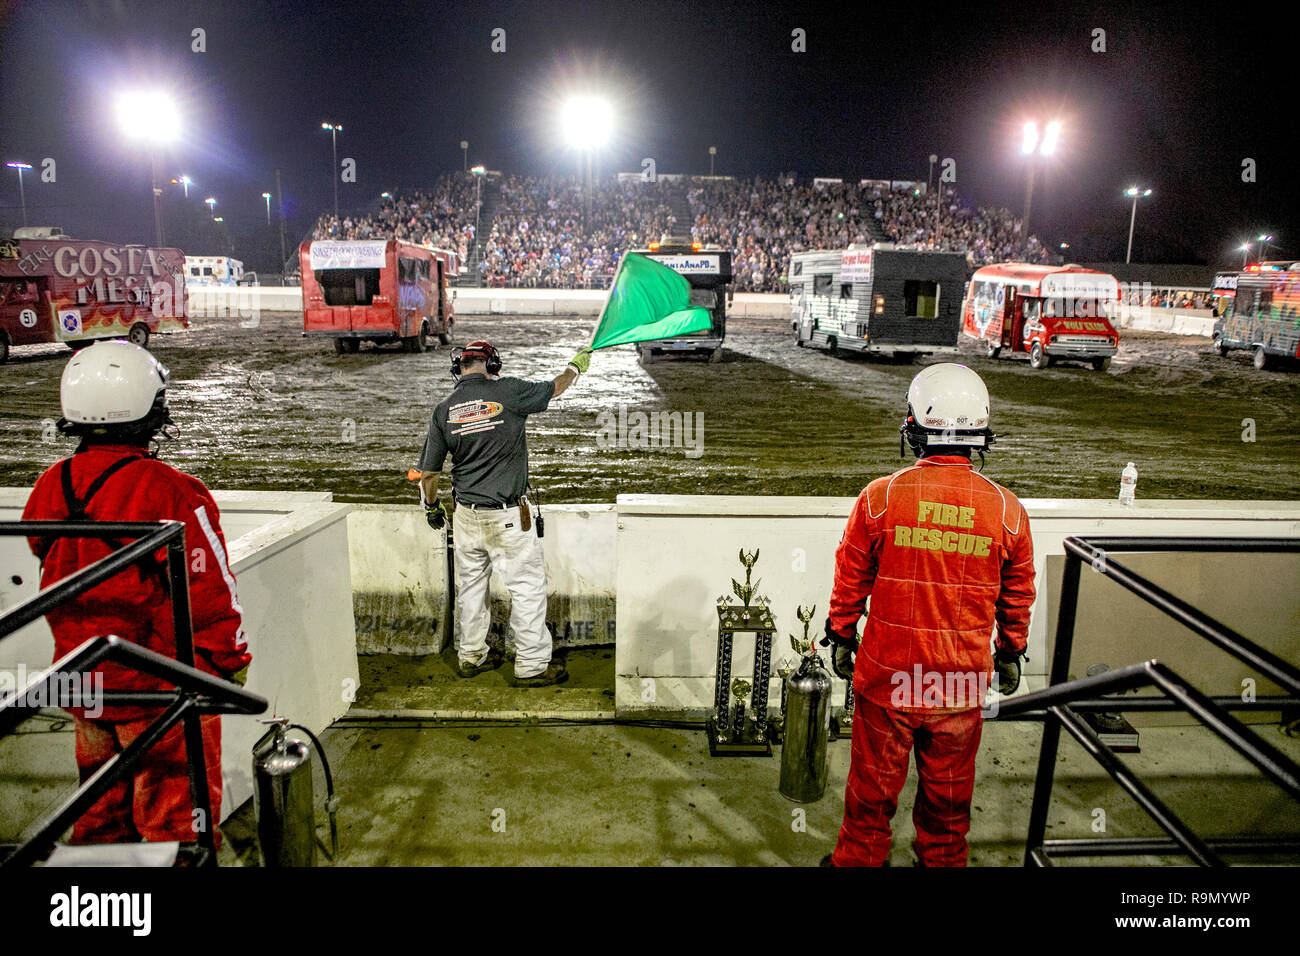 A referee waves a green flag to signal the start of a motor home-crashing demo derby in a Costa Mesa, CA, stadium. In foreground are rescue workers in safety clothing. Stock Photo